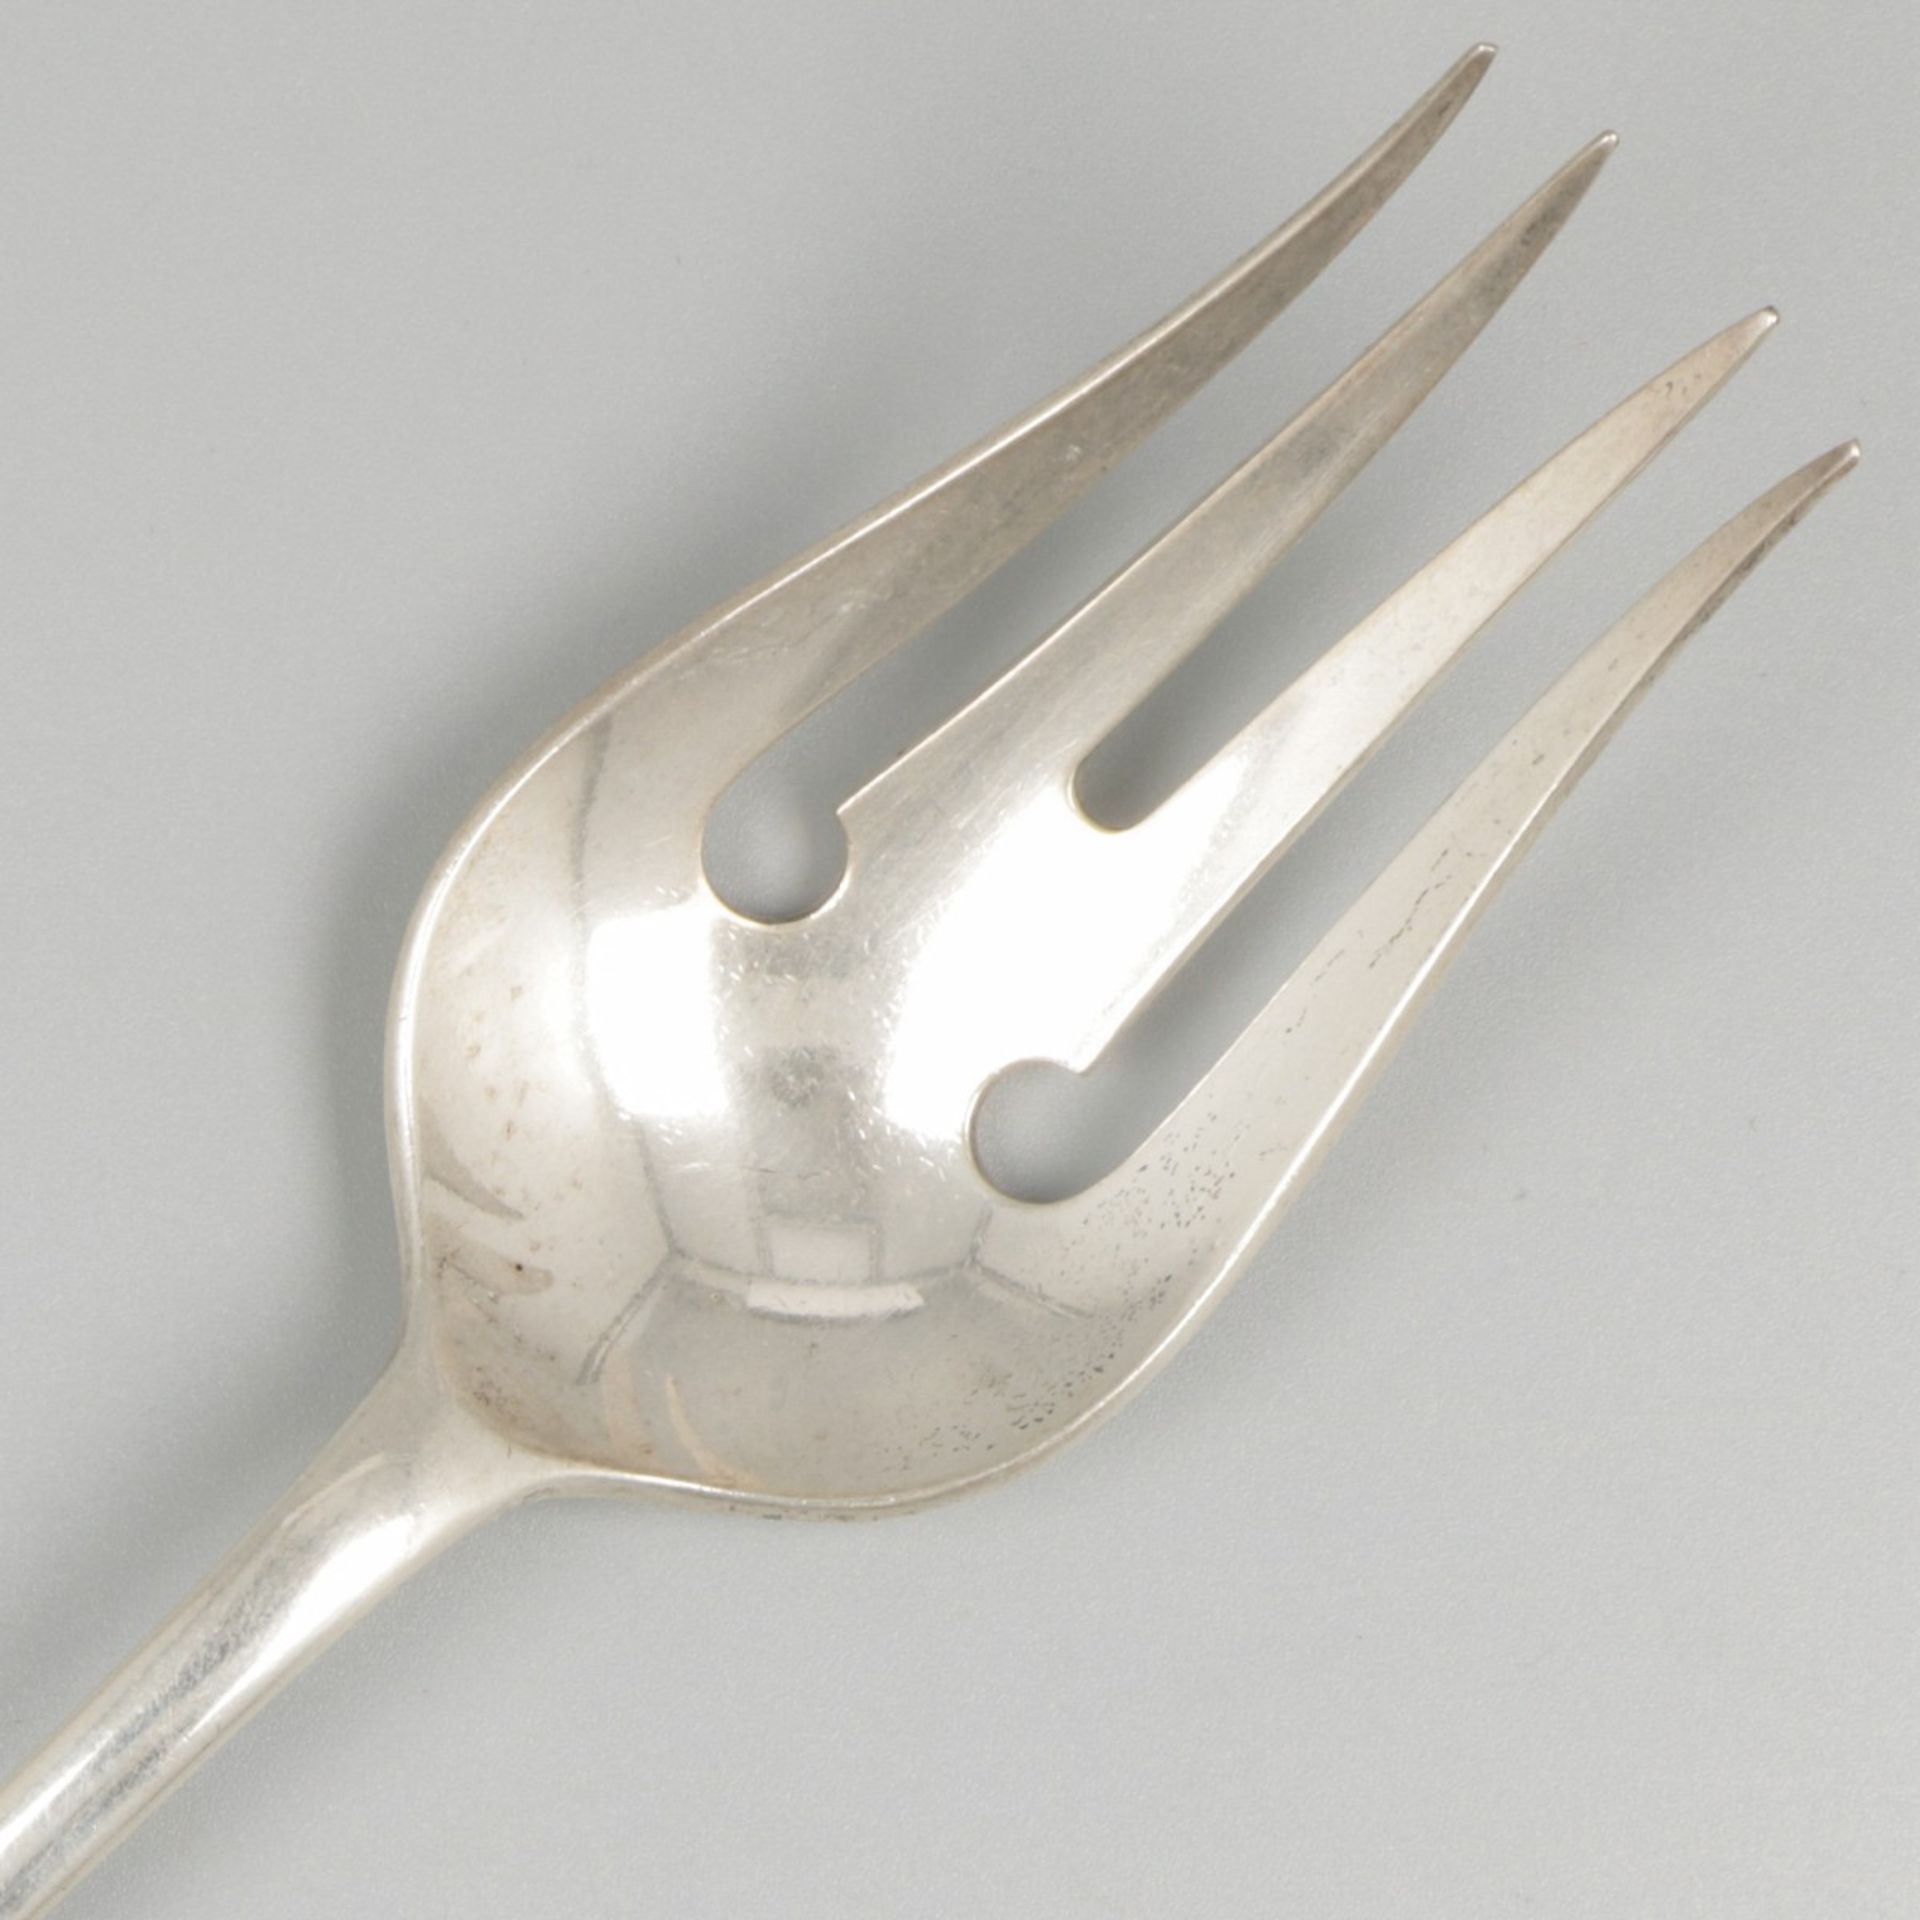 Salad servers ''Haags Lofje'' silver. - Image 5 of 9